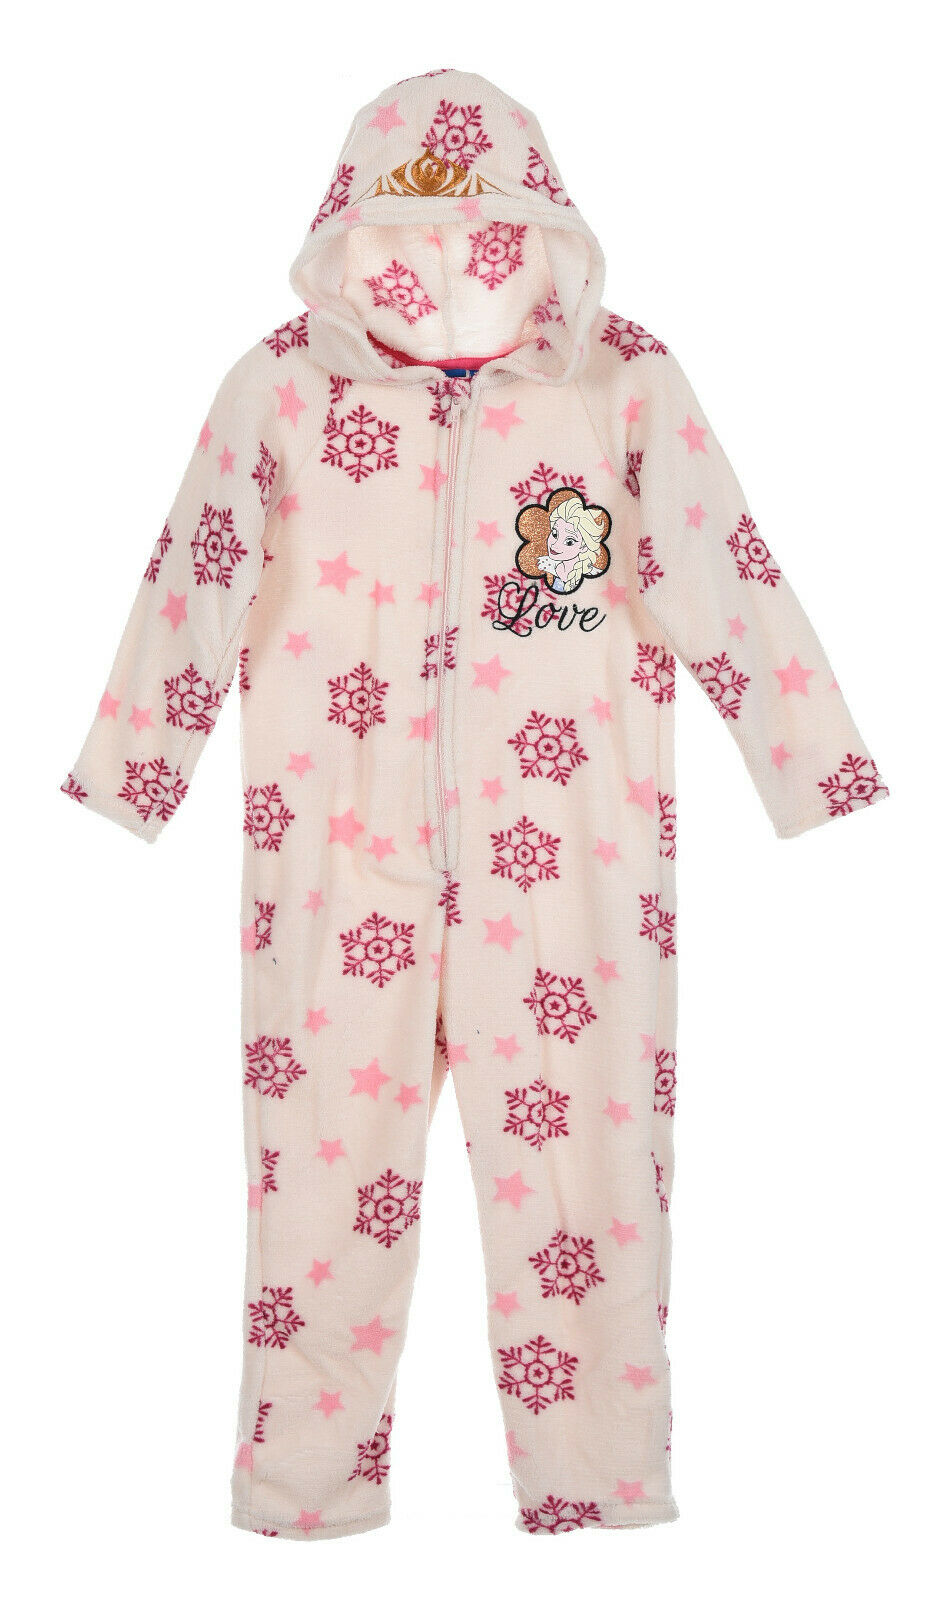 Disney Frozen Fleece Onsie In Cream With Pink Snowflake & Elsa Design. Ages 3-6 Available.